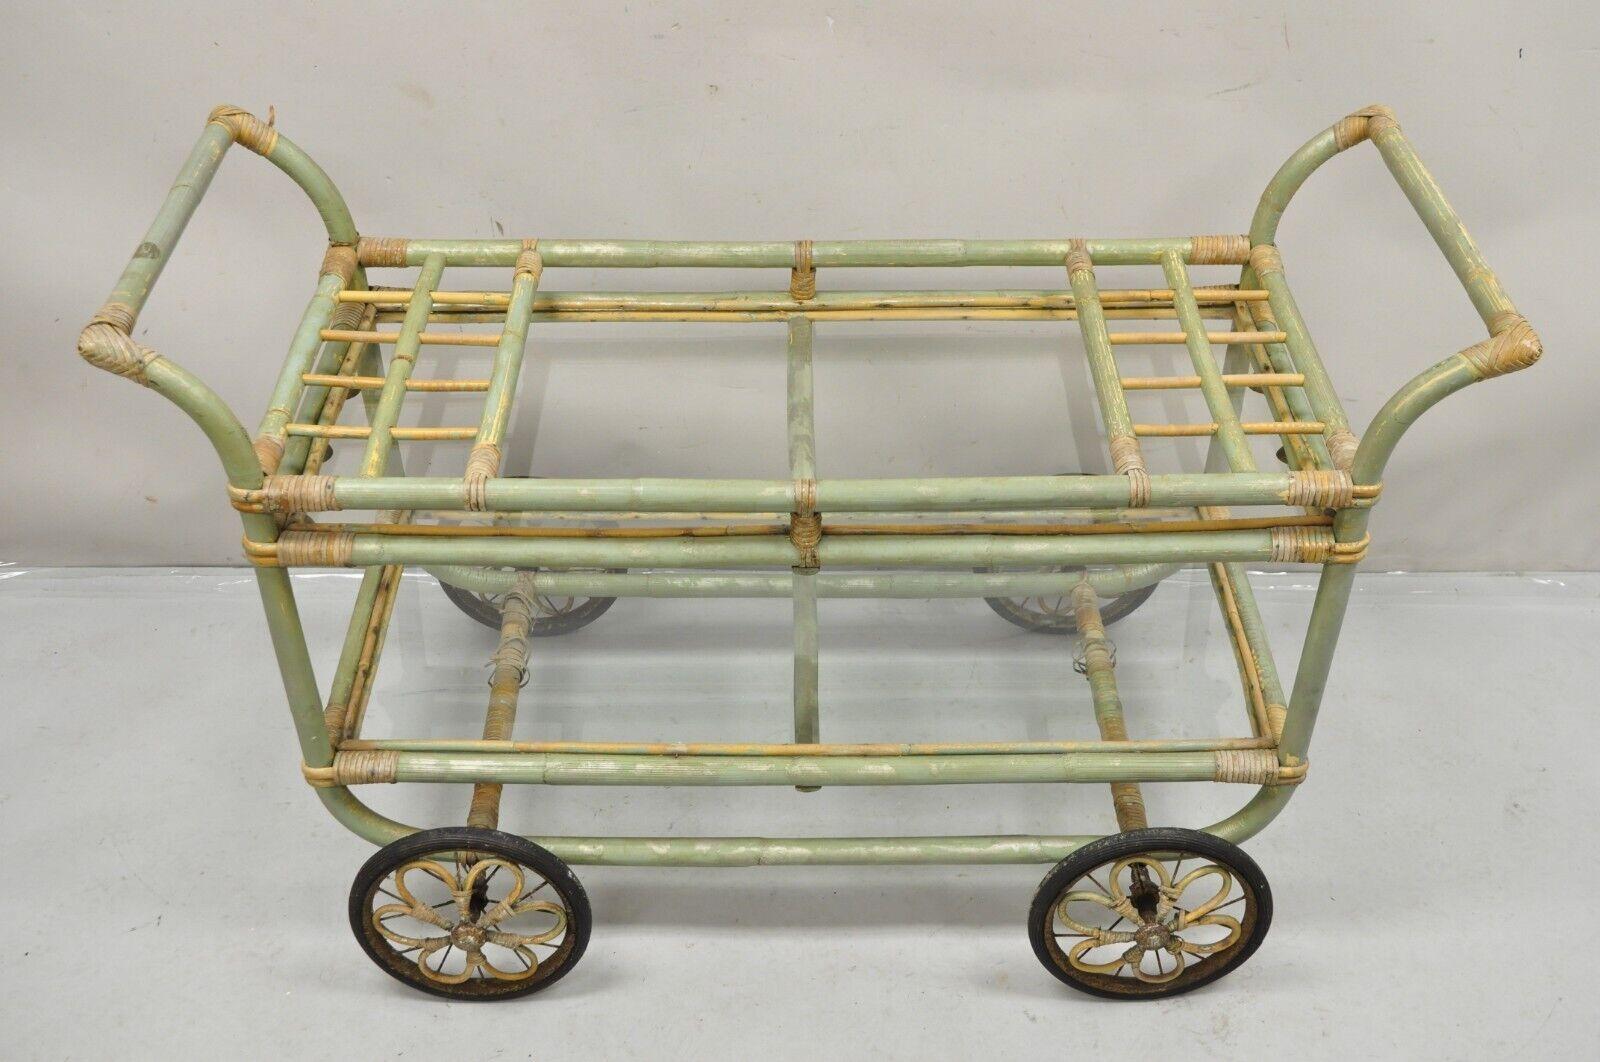 Vintage Boho Chic Bamboo Rattan Bentwood Green 2 Tier Rolling Bar Cart Server. Item features2 glass tiers, green destressed painted finish, sculptural bentwood frame, very nice vintage item. Circa Mid 20th Century. Measurements: 31